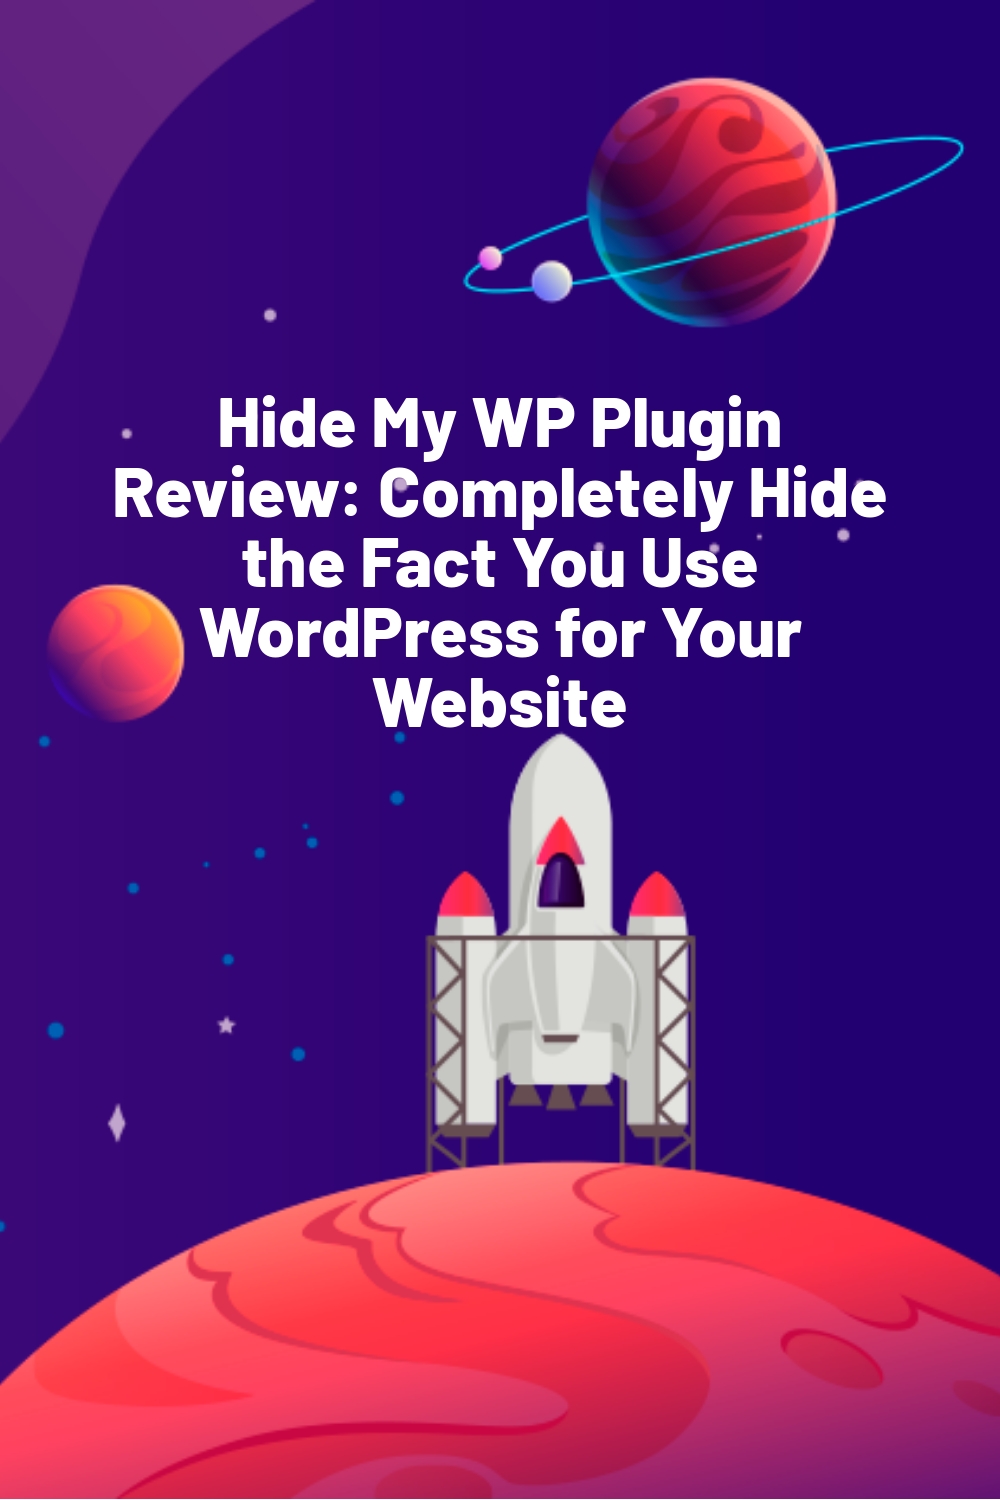 Hide My WP Plugin Review: Completely Hide the Fact You Use WordPress for Your Website